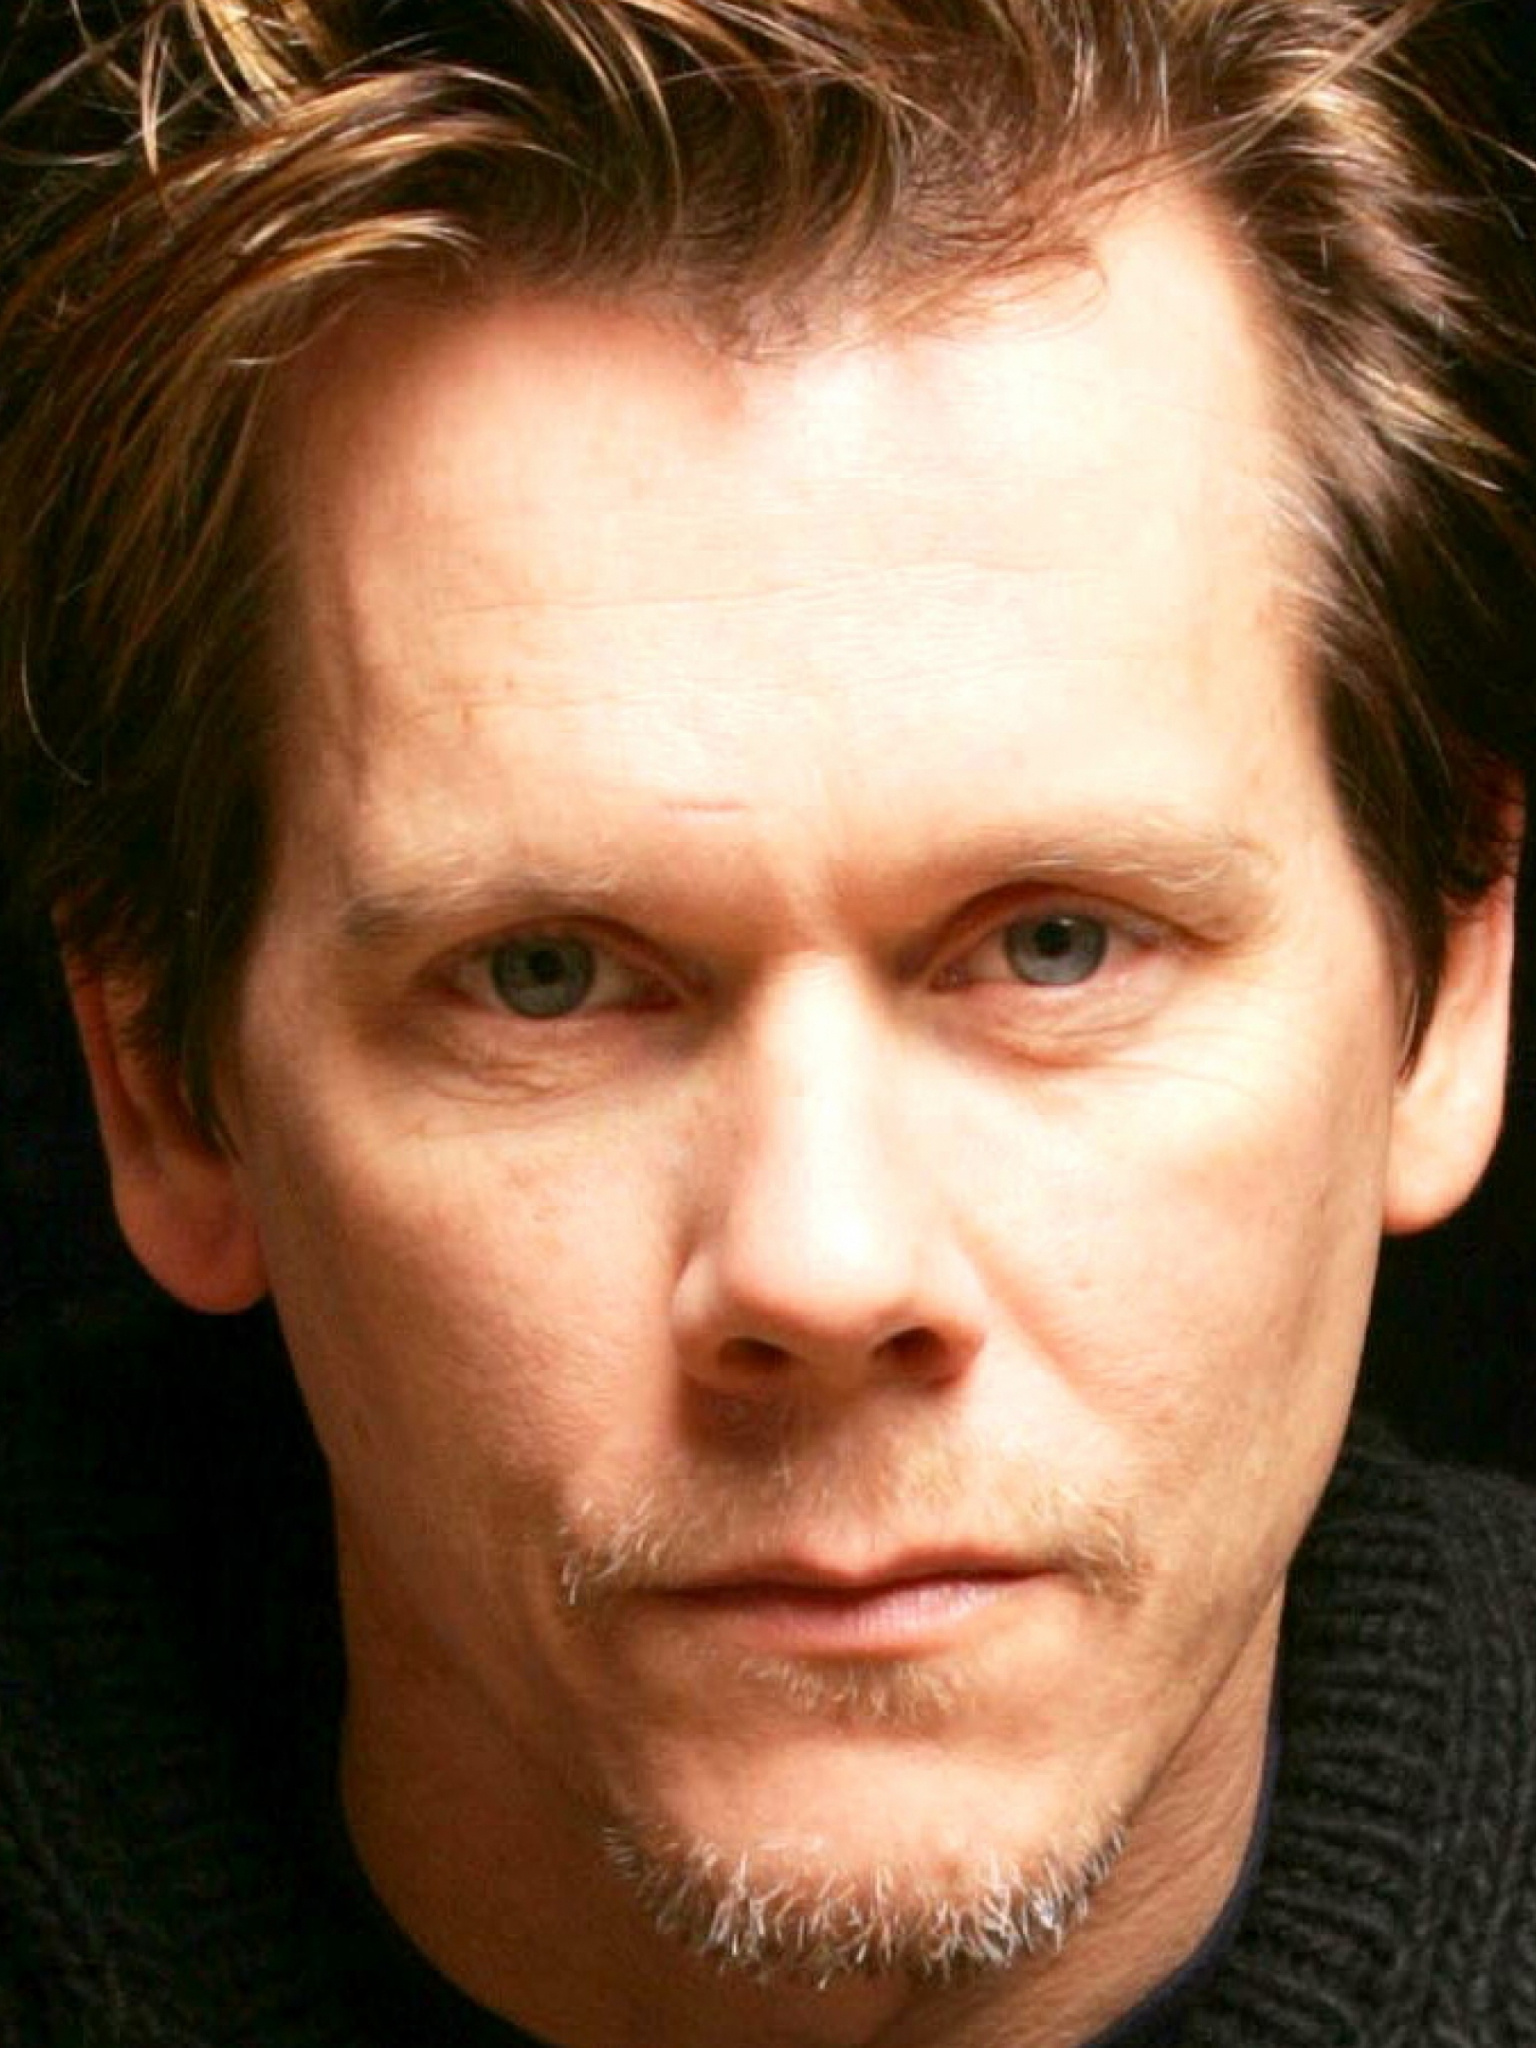 Kevin Bacon, Download 3840x2160, Man Eyes Hair, Explore 96 wallpapers, 1540x2050 HD Handy